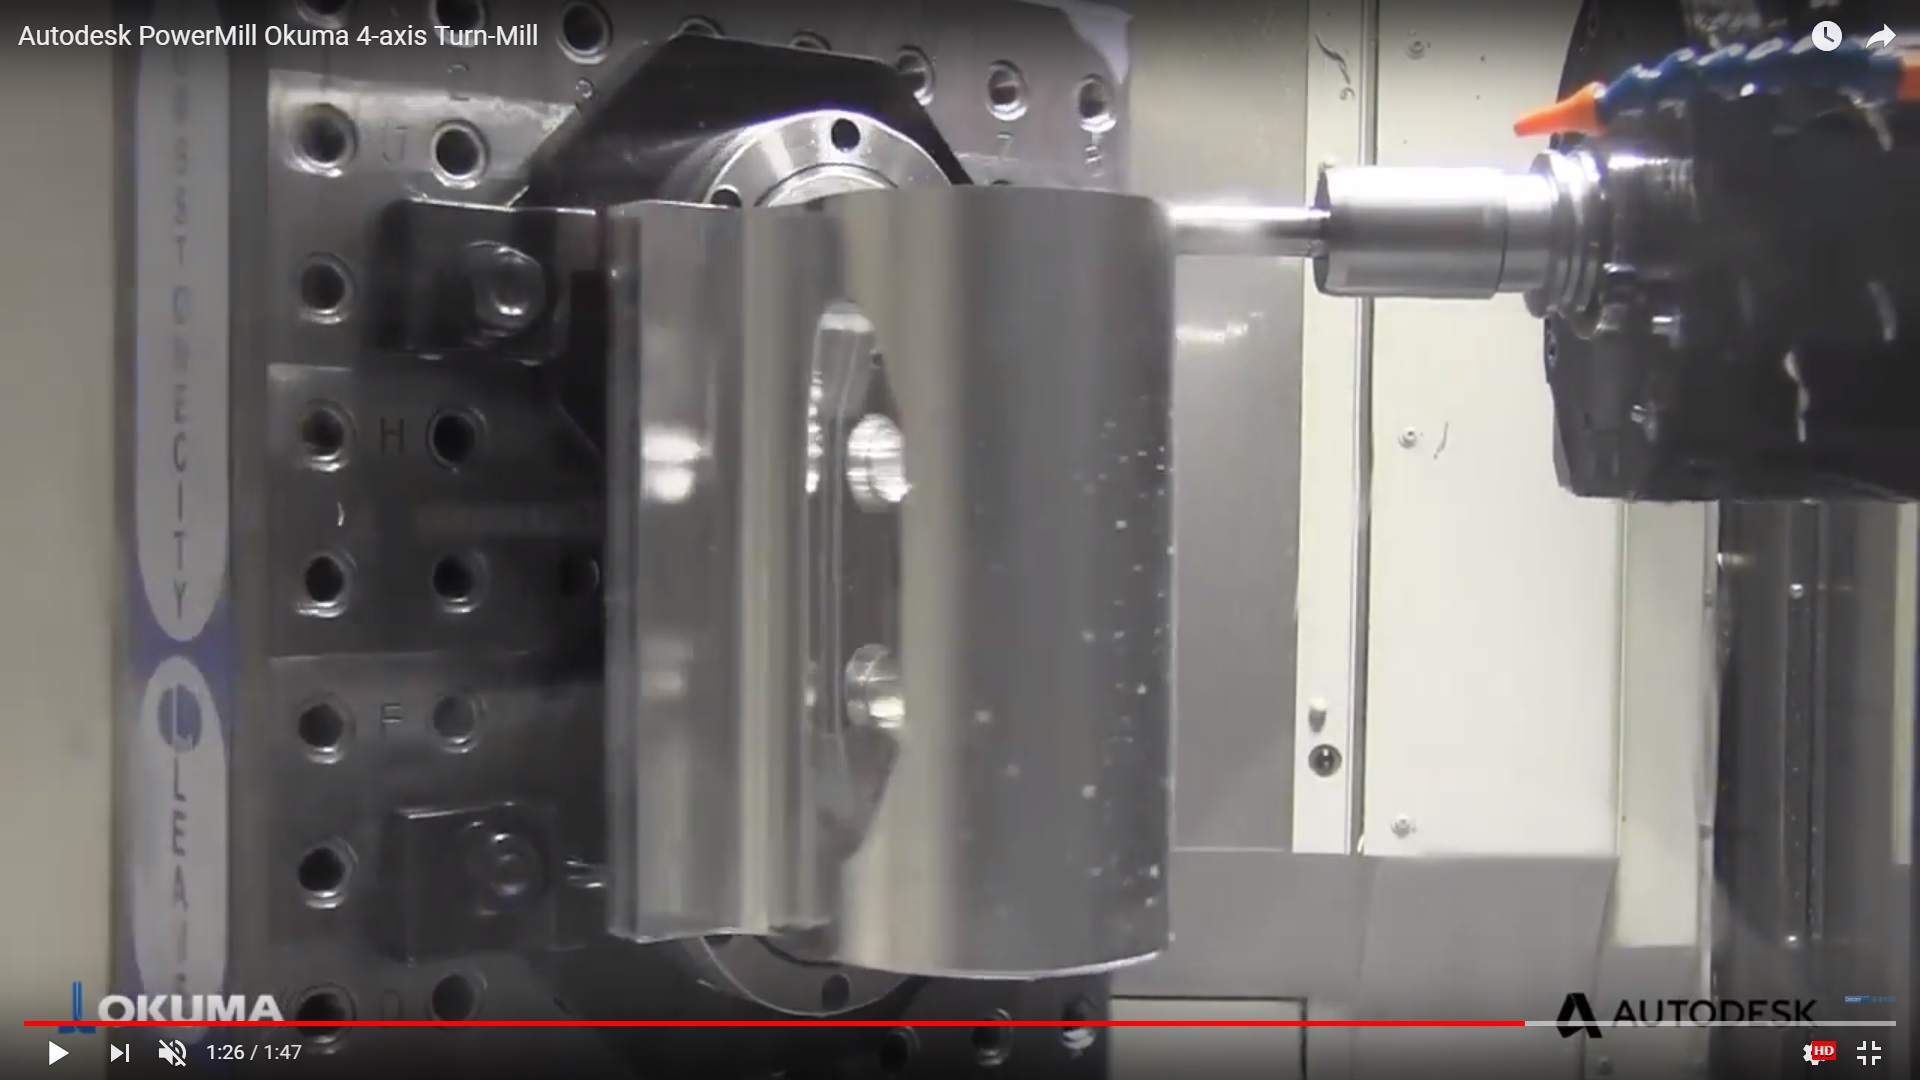 You are currently viewing Autodesk PowerMill Okuma 4-axis Turn-Mill